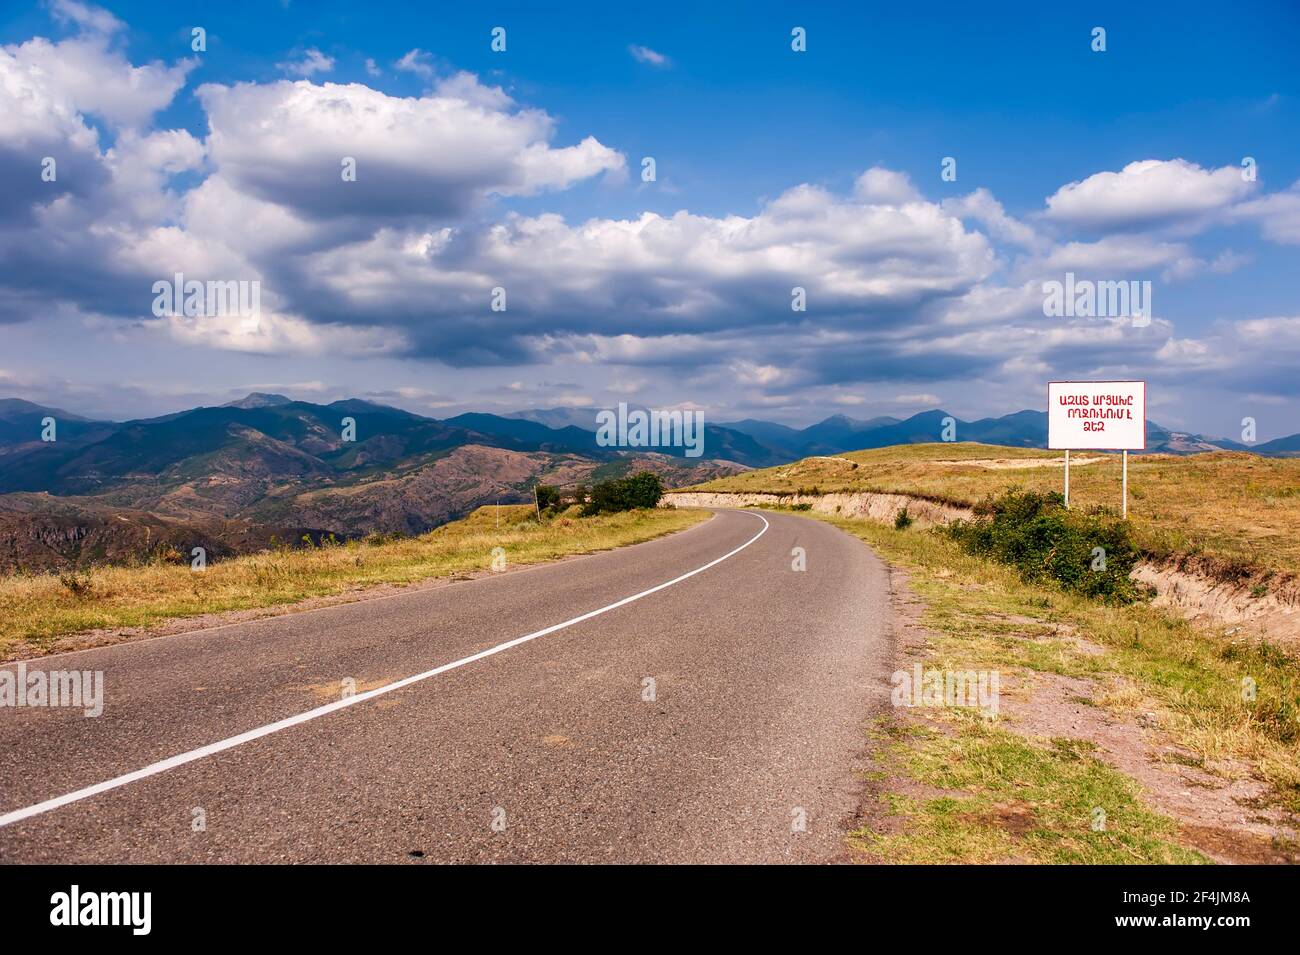 On the road to the Republic of Artsakh, or Nagorno Karabakh. The sign says 'Free Artsakh Welcomes You'. Stock Photo